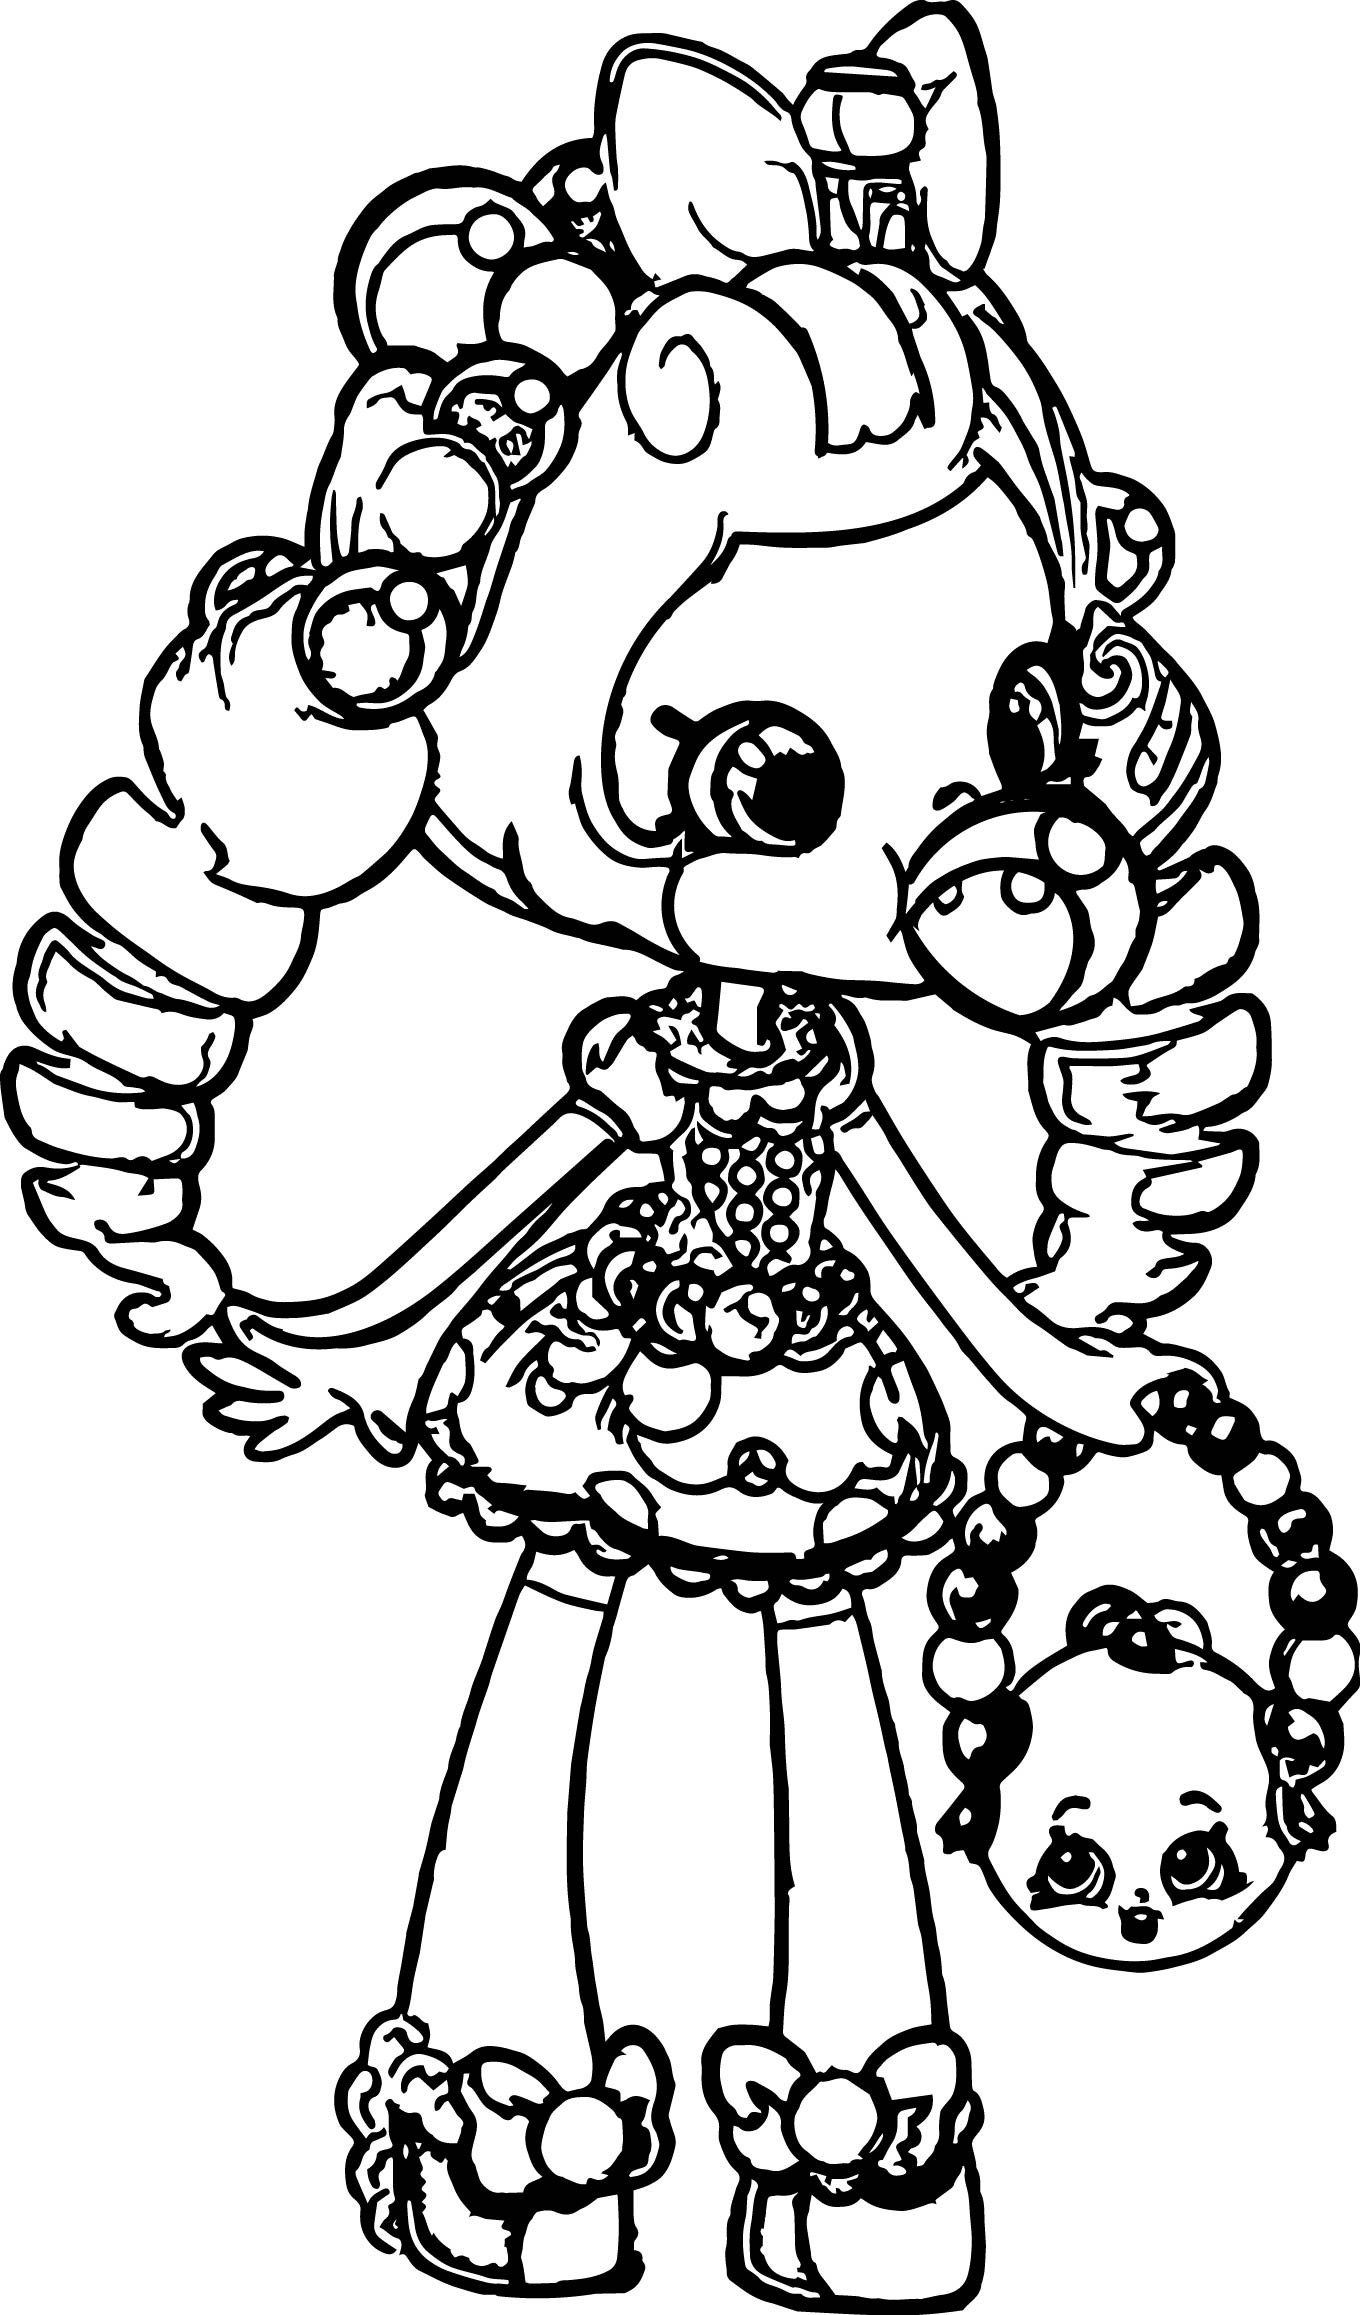 Shopkins Girls Coloring Pages
 Shopkins Coloring Pages For Girls at GetColorings